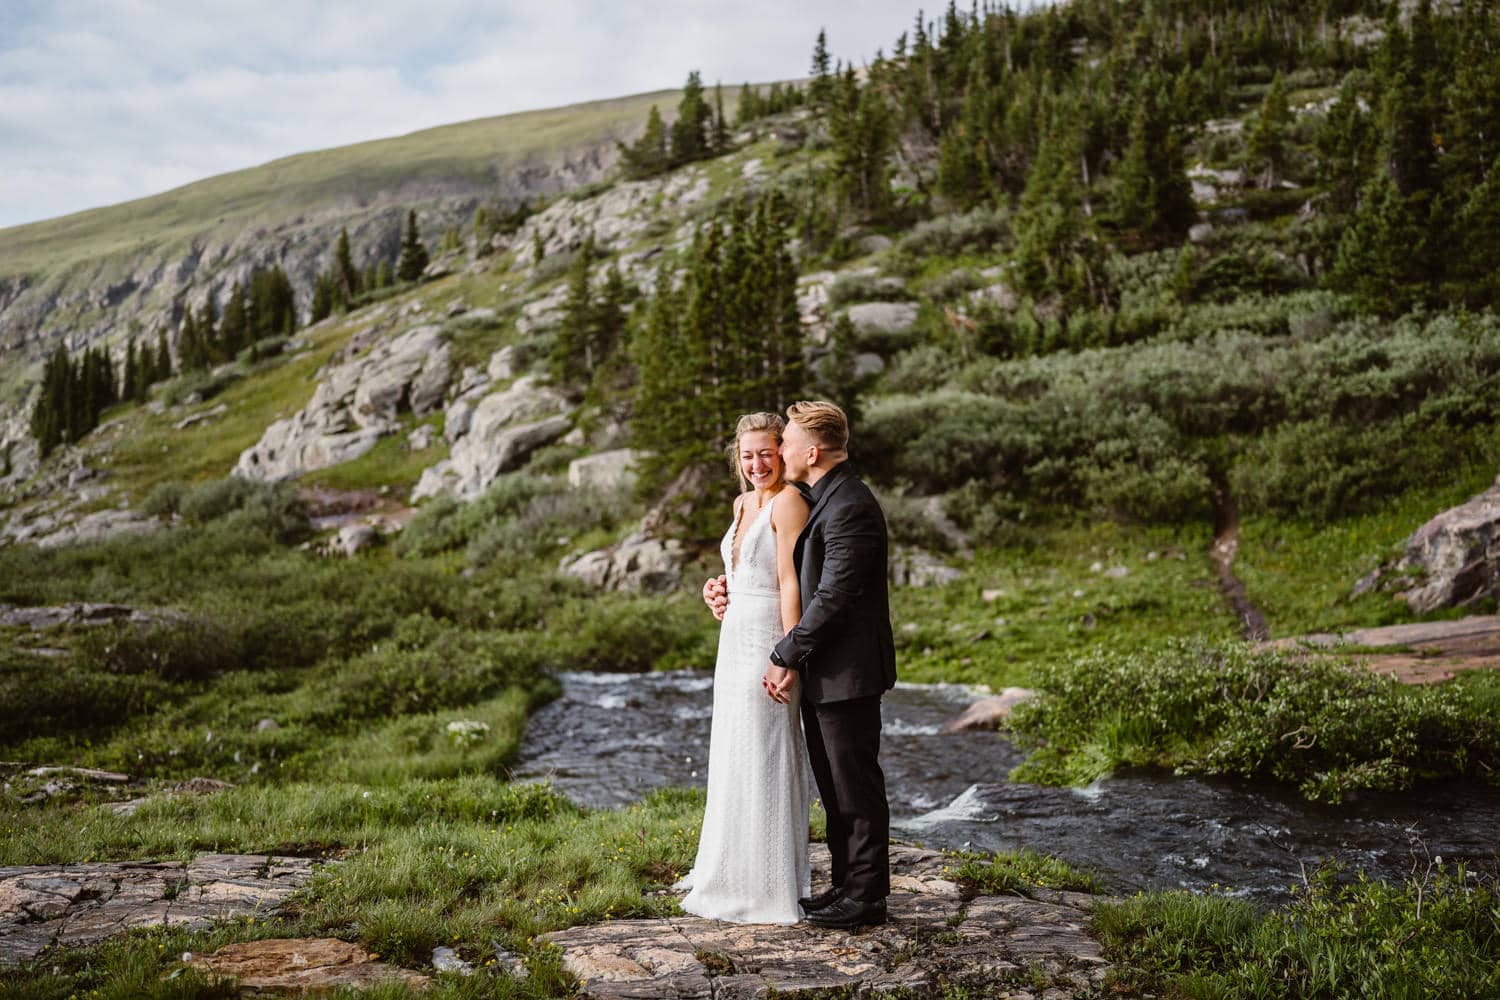 A couple sharing an intimate moment near a waterfall on their elopement day.